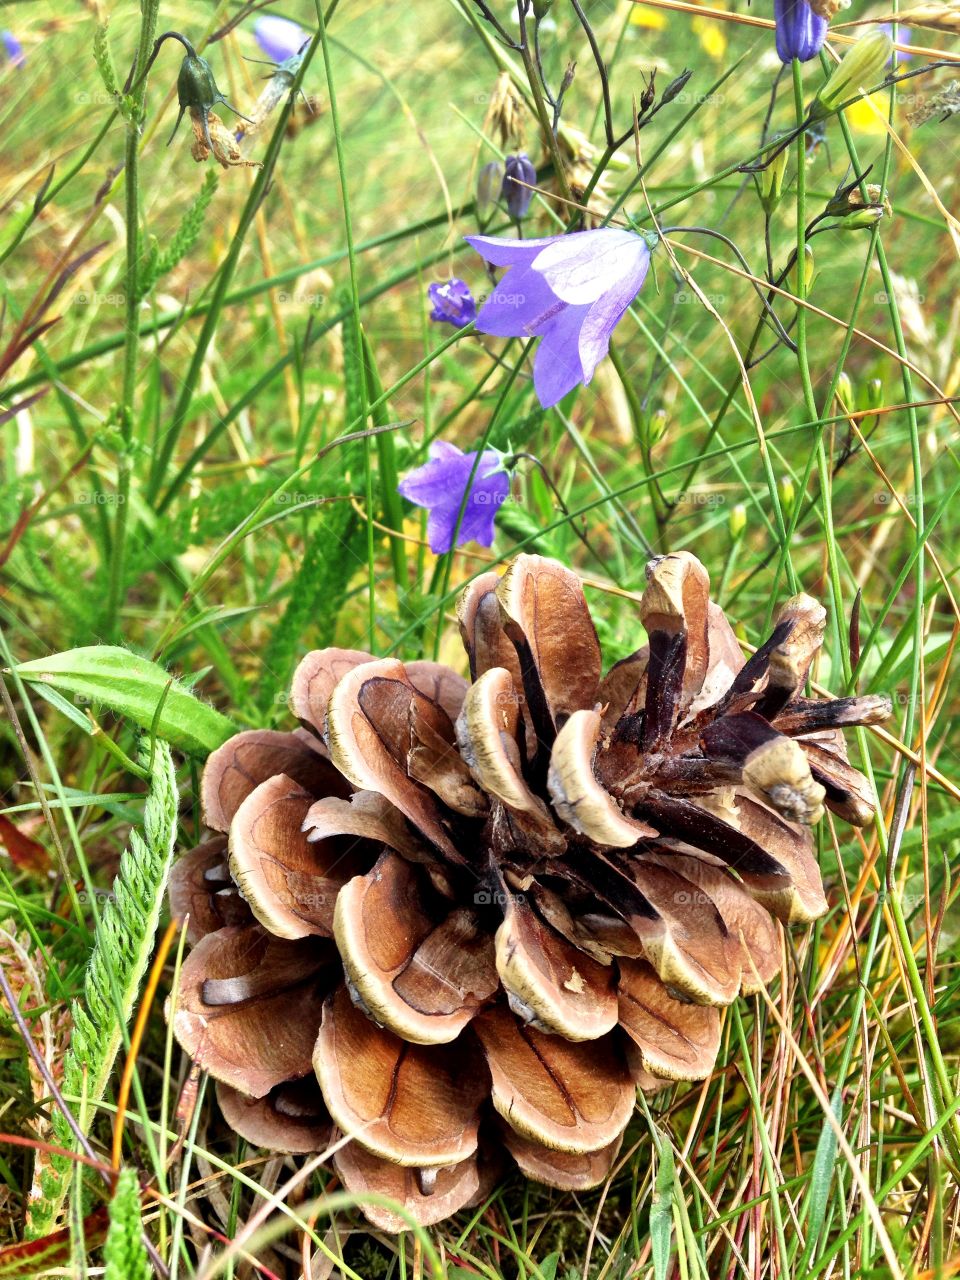 Pine cone with flowers in grass